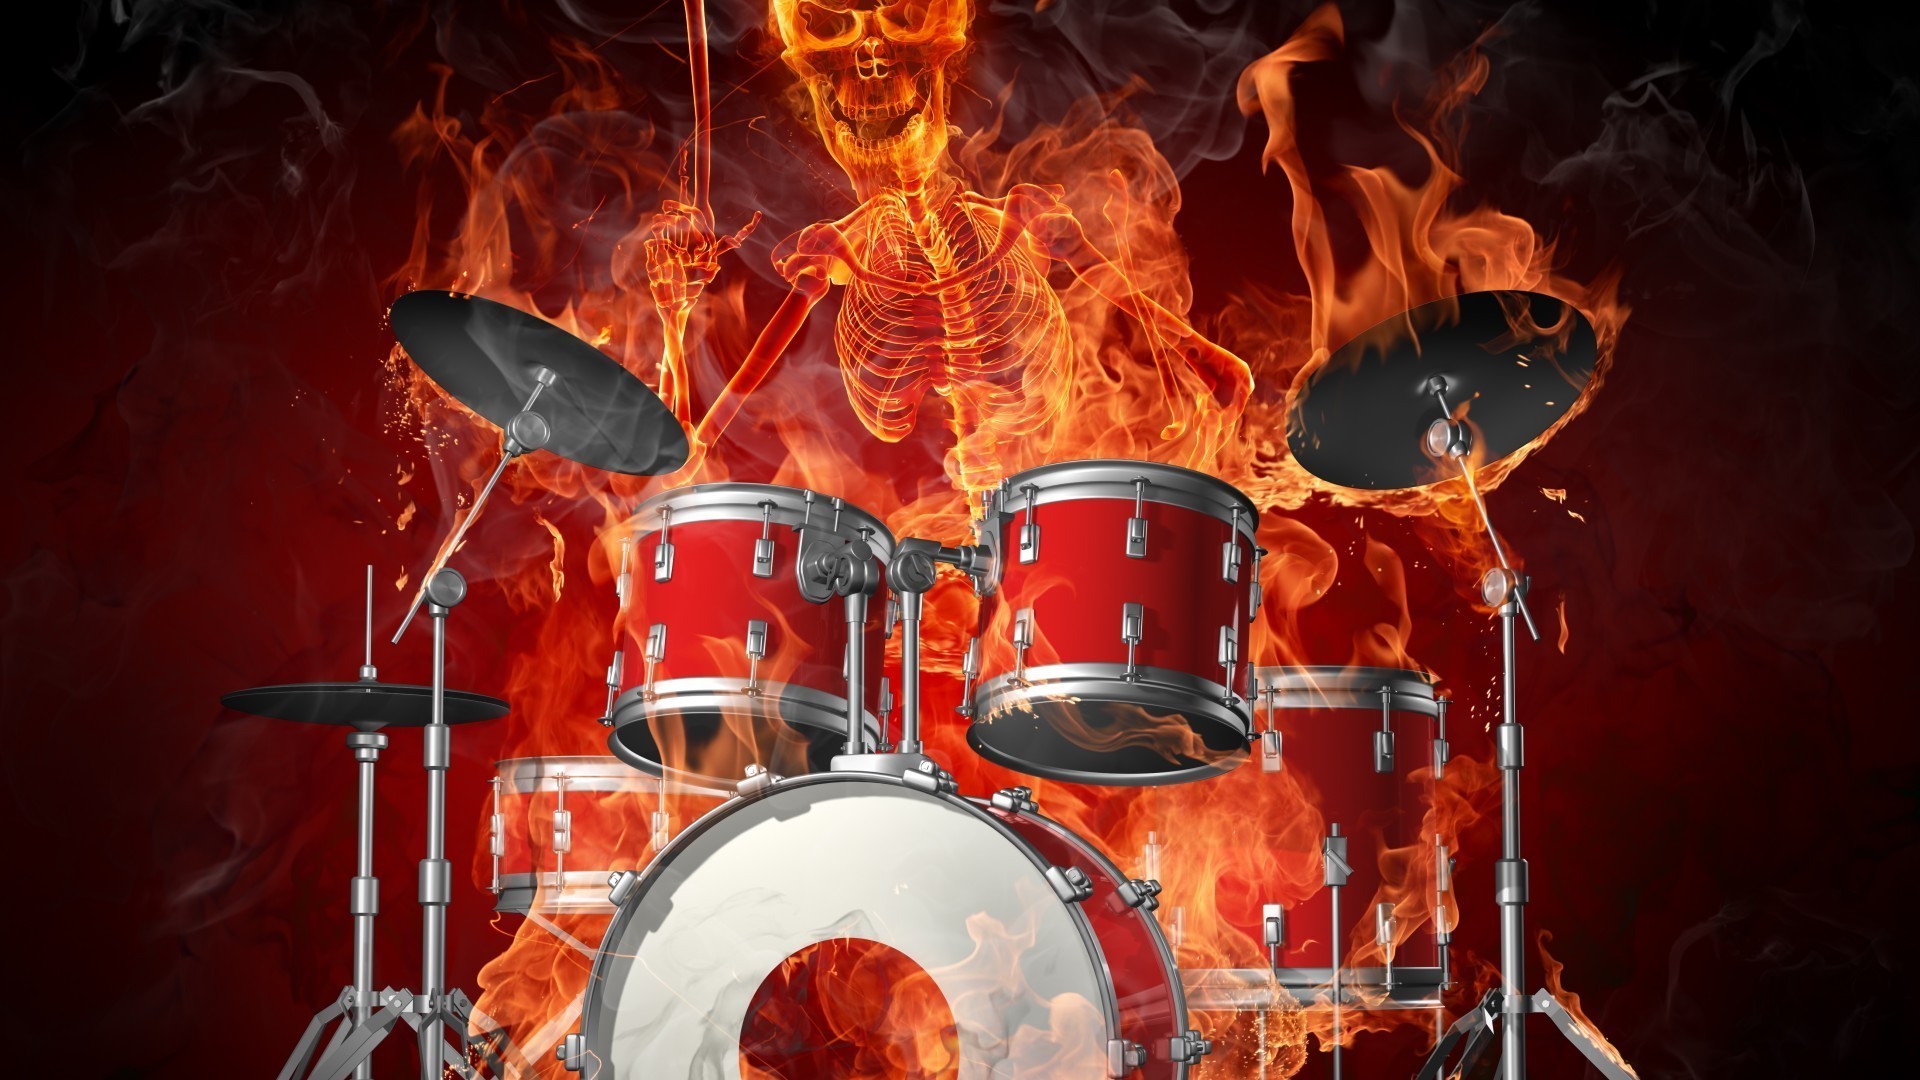 musical instruments drum music drummer percussion instrument festival performance musician band concert flame cymbal sound